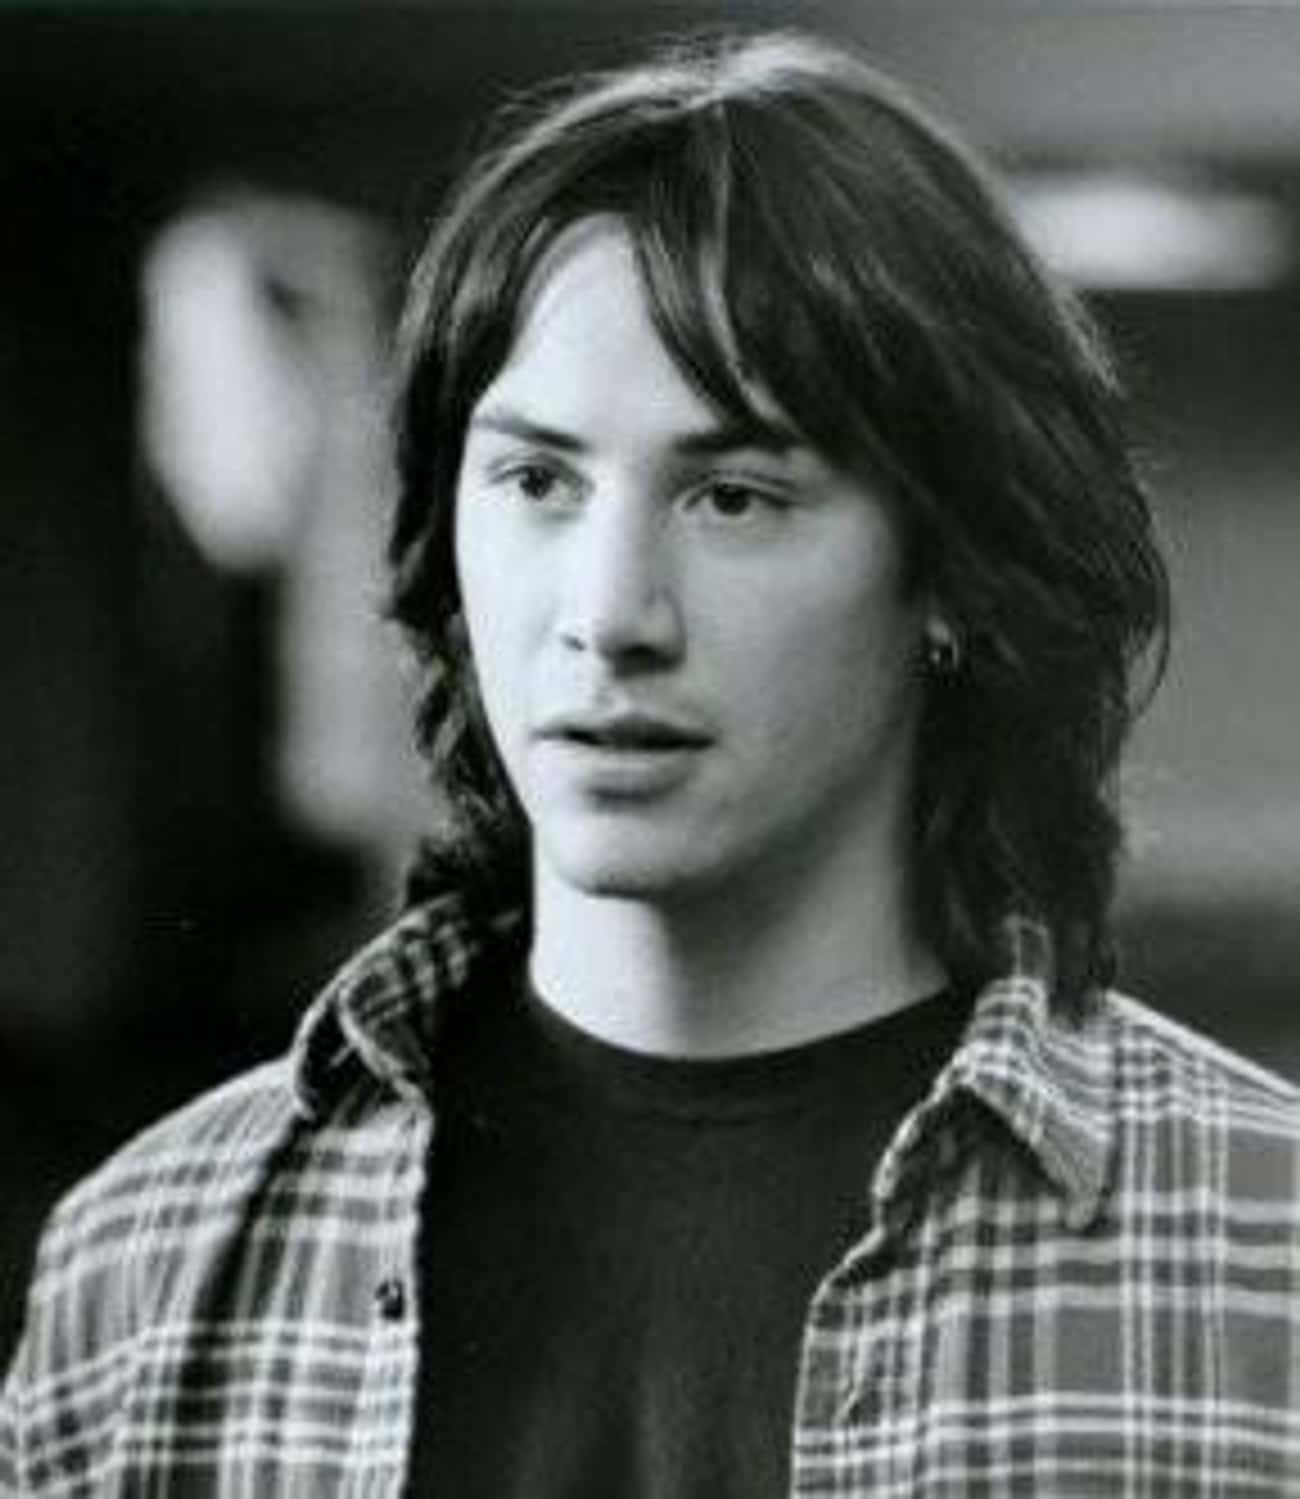 Young Keanu Reeves with Long Hair in Black T-Shirt and Patterned Buttondown Shirt